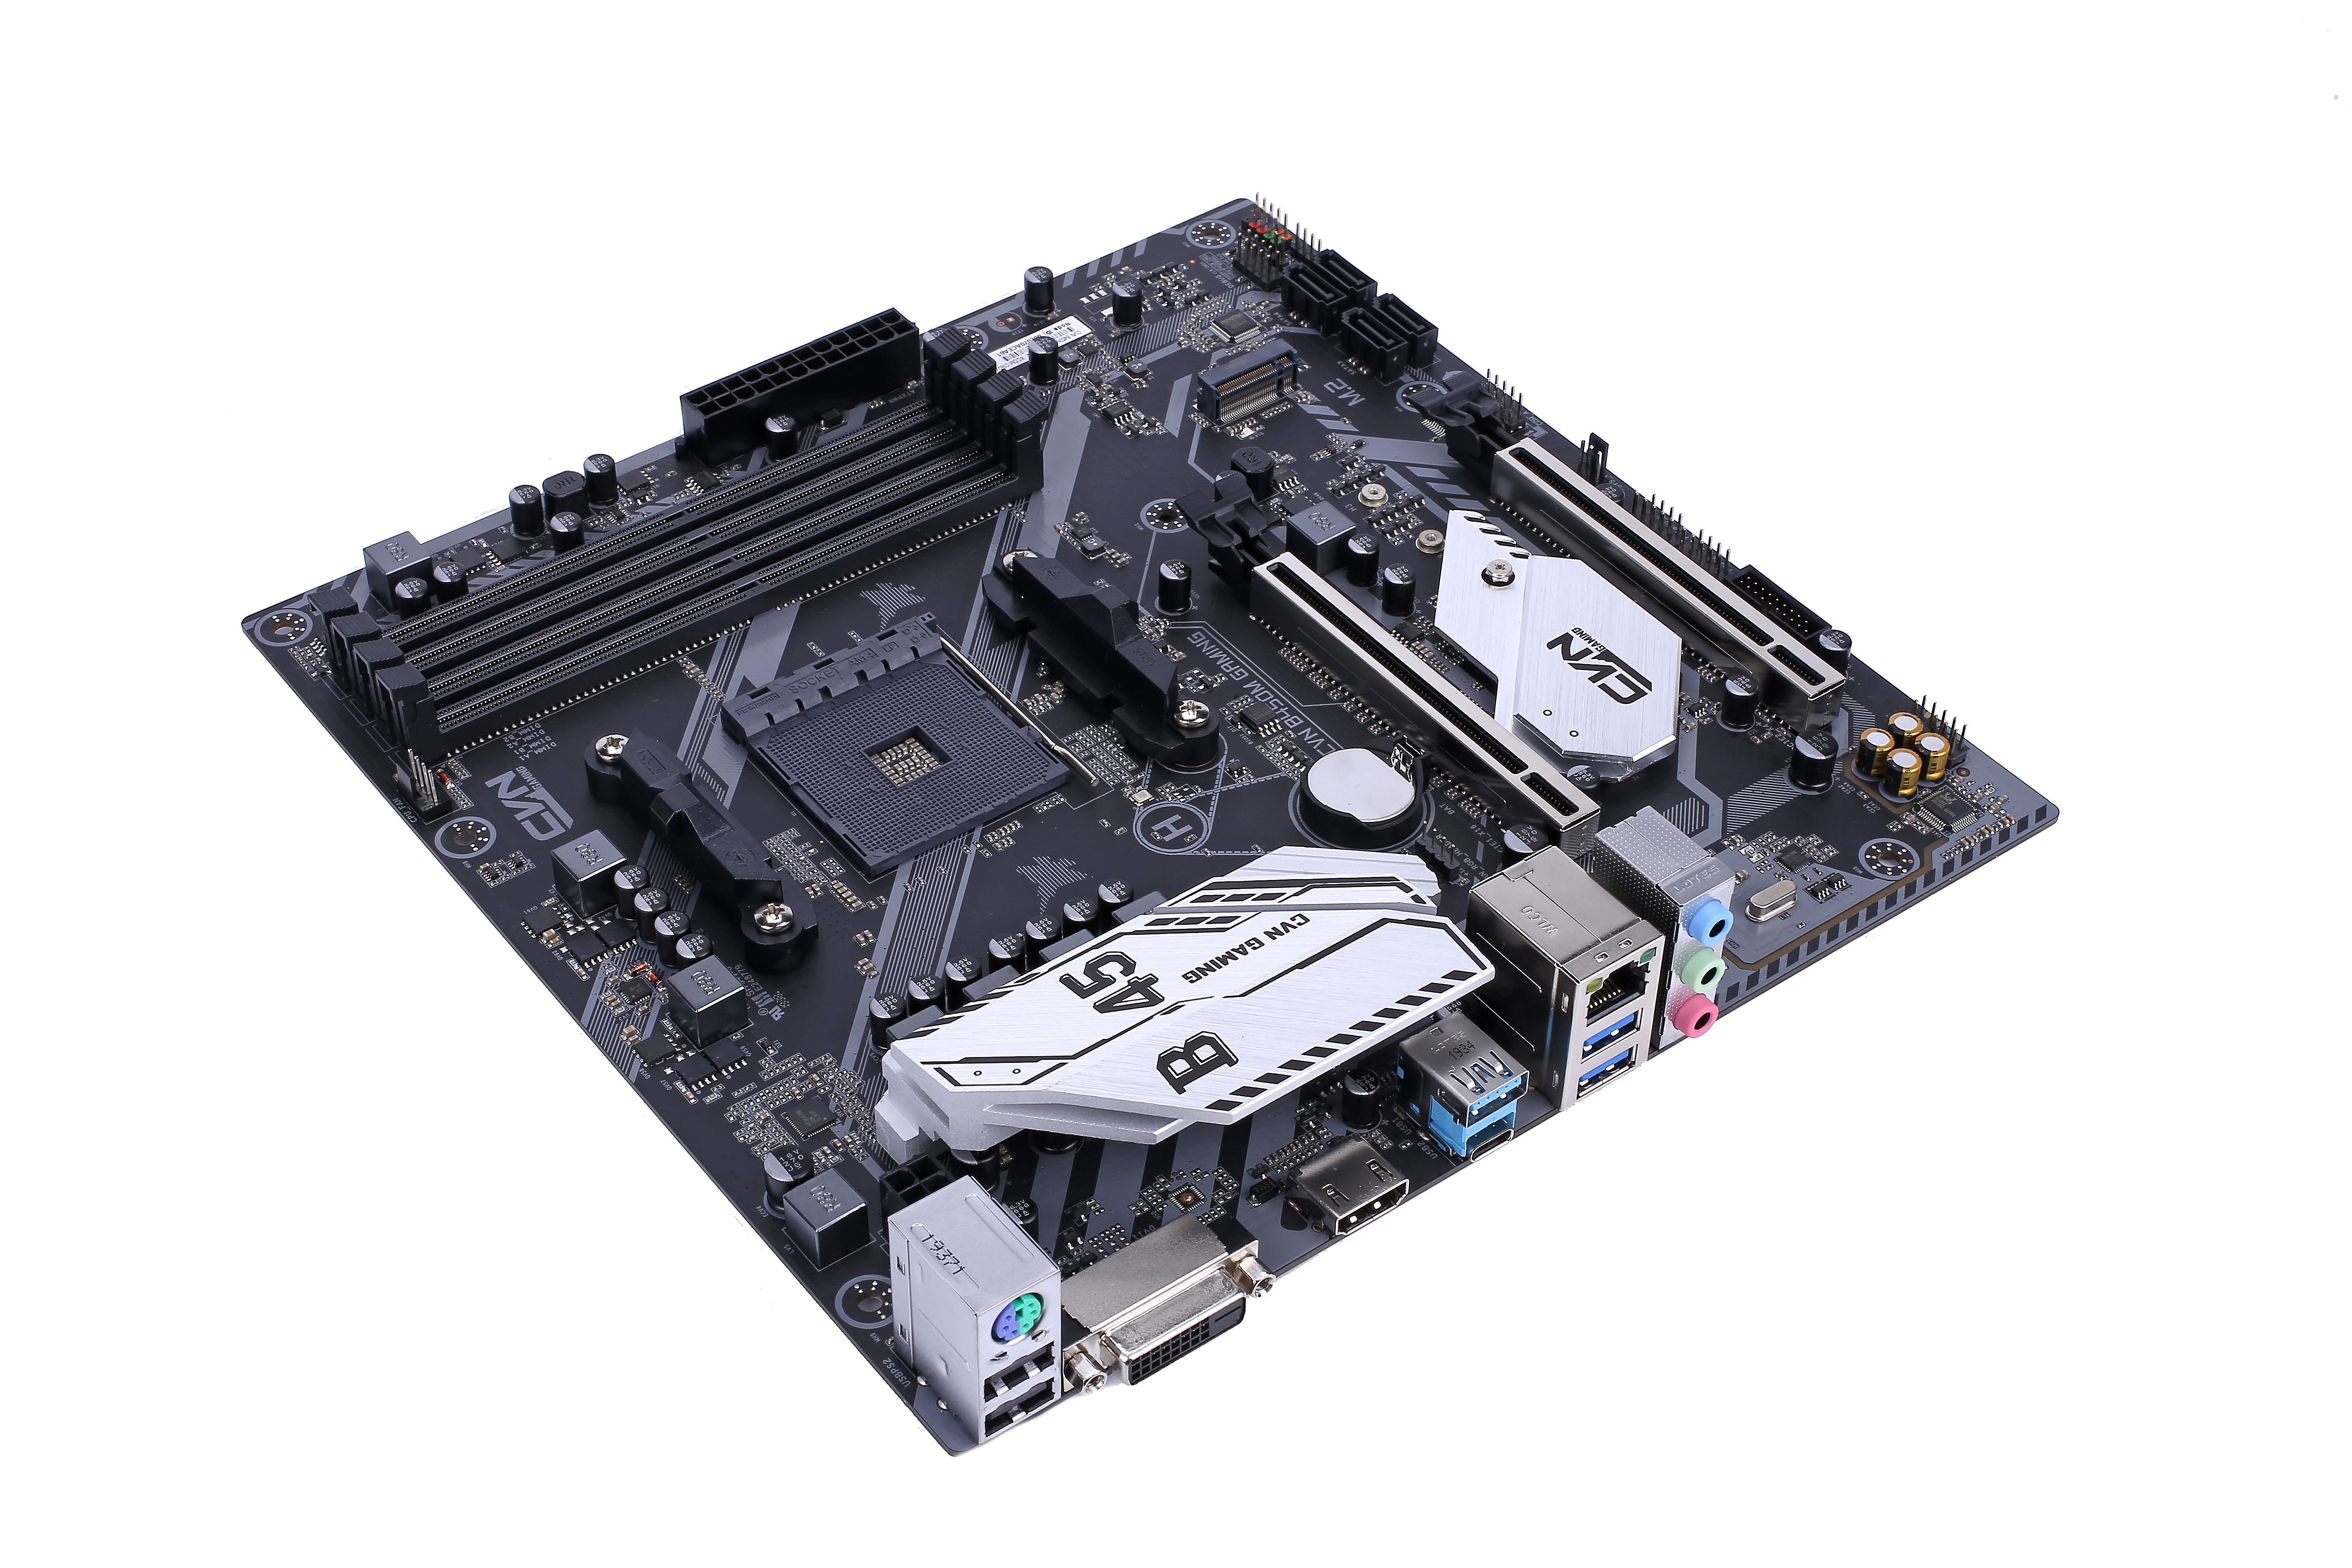 Colorful-CVN-B450M-GAMING-V14-Computer-Motherboard-Dual-Channel-DDR4-Memory-OC-Support-AMD-Socket-AM-1720803